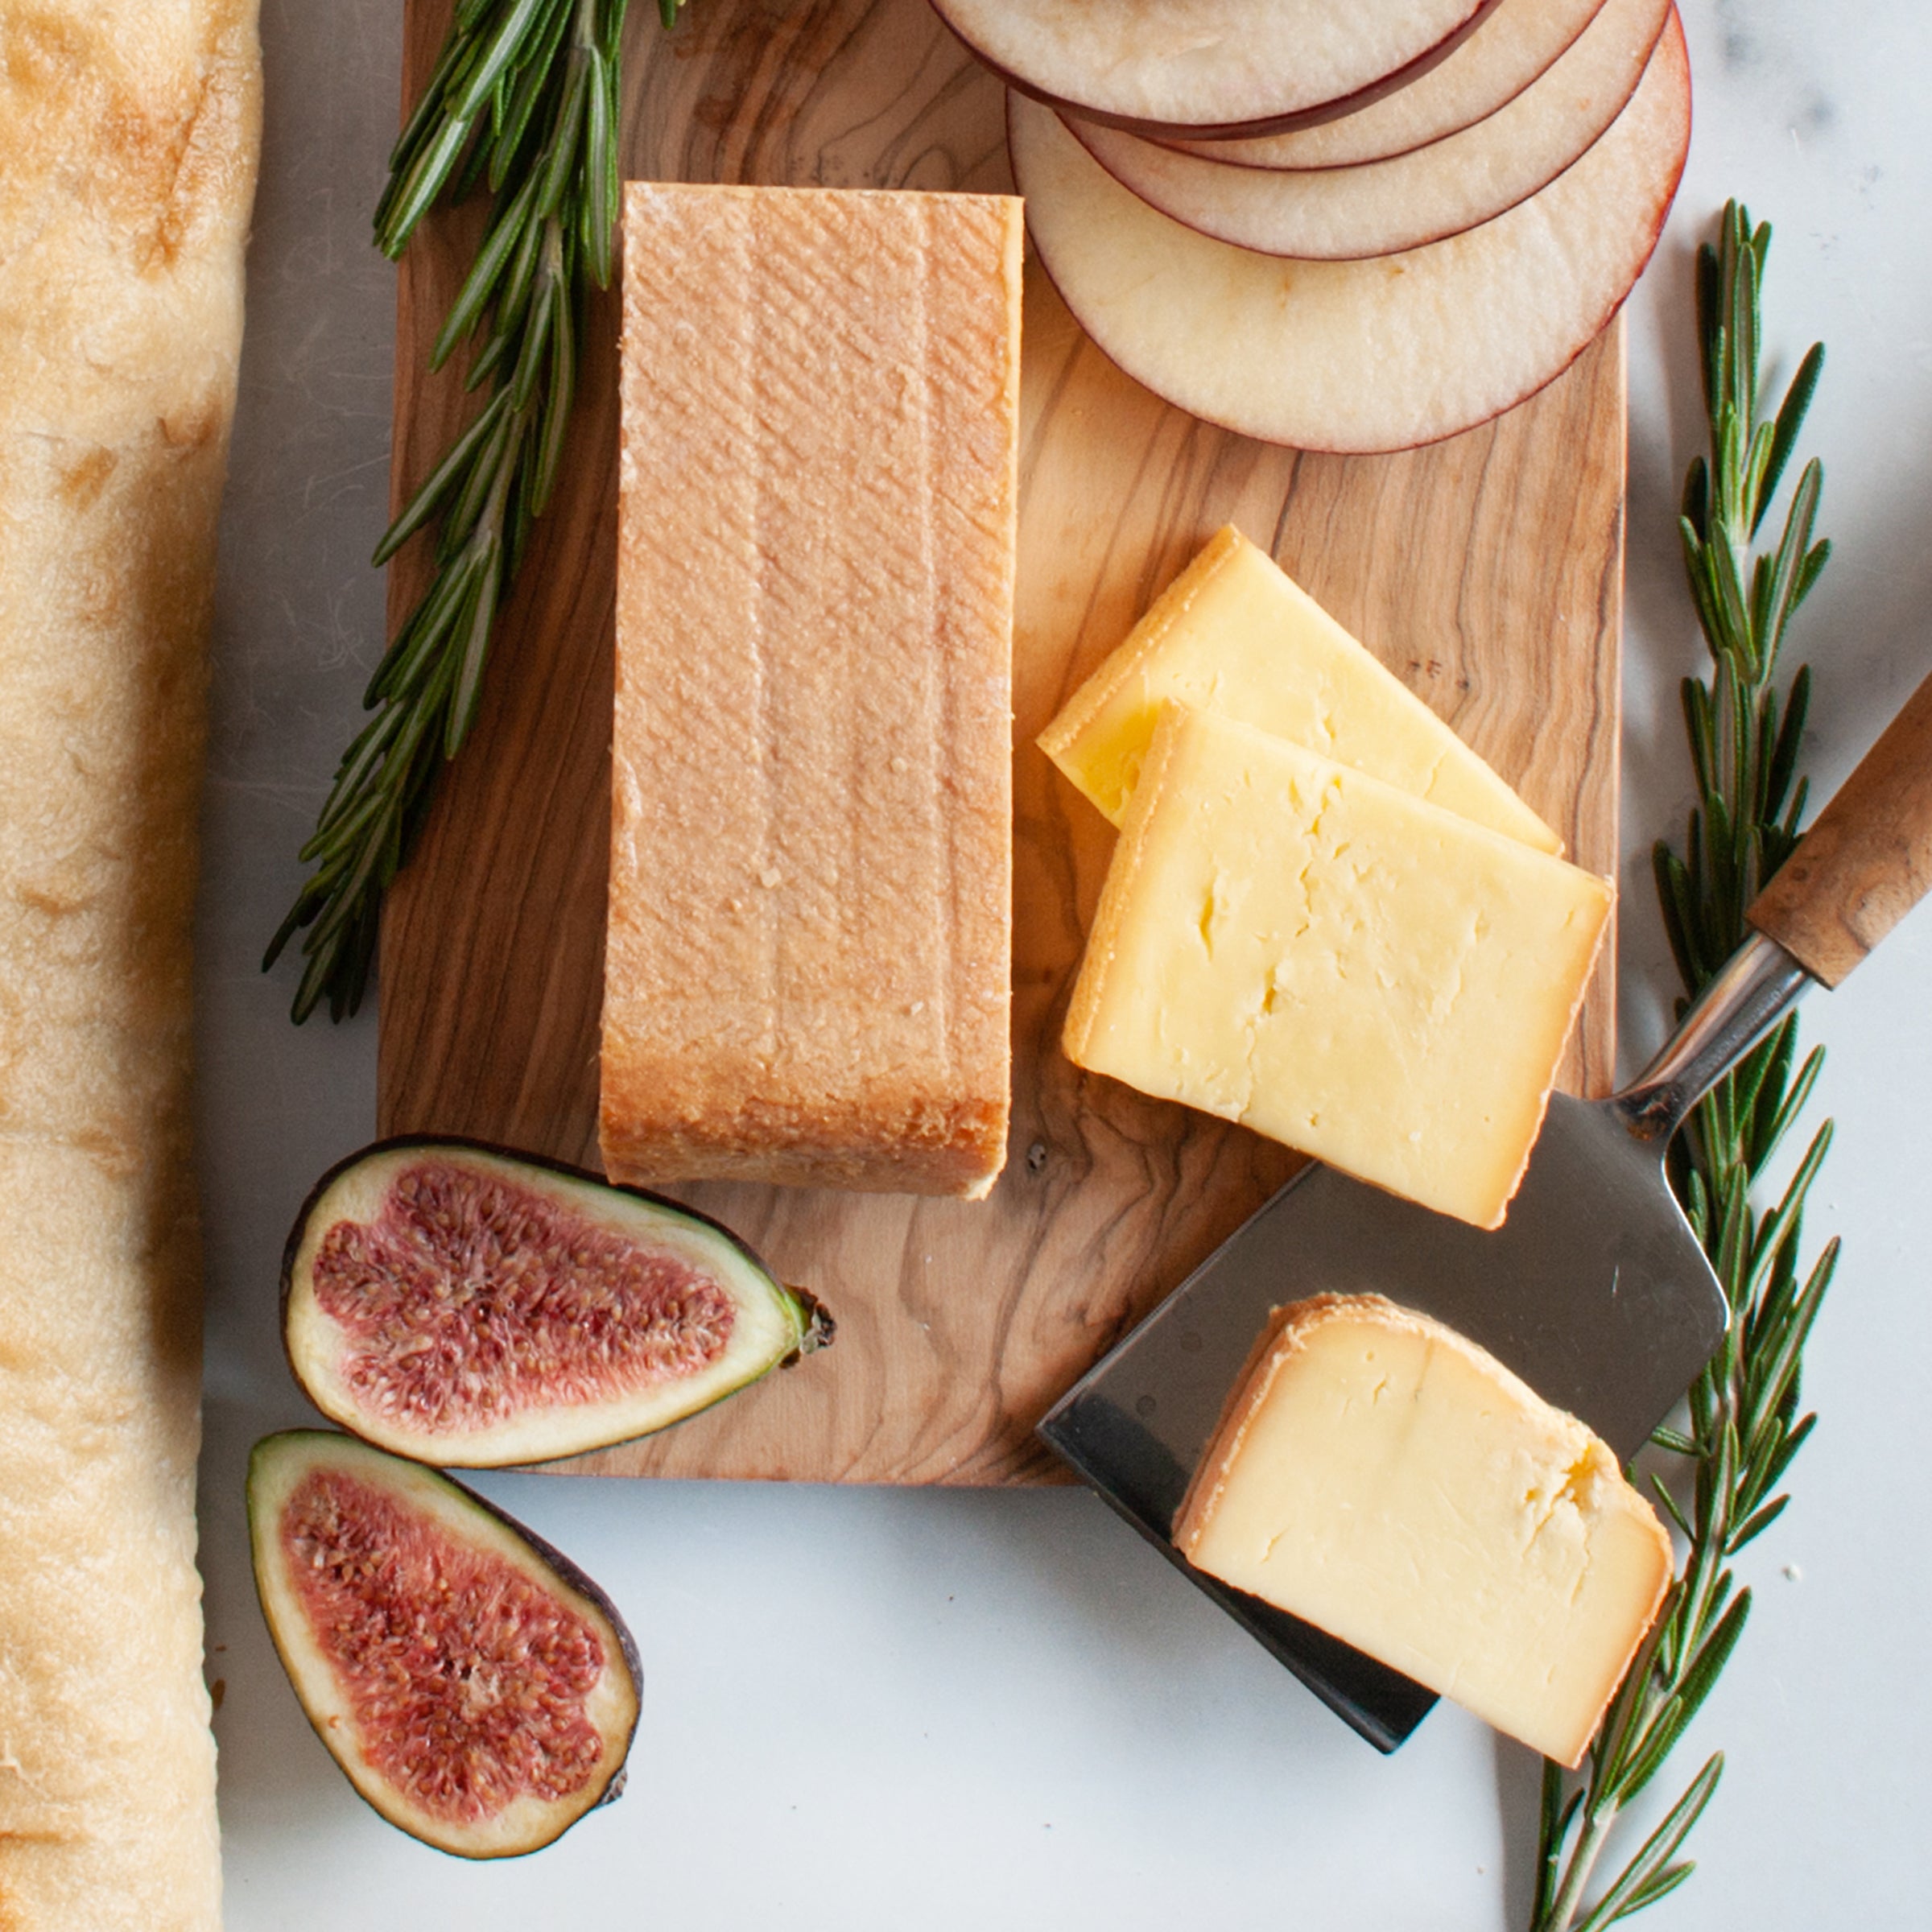 Meadow Creek Dairy's Grayson Cheese_Cut & Wrapped by igourmet_Cheese